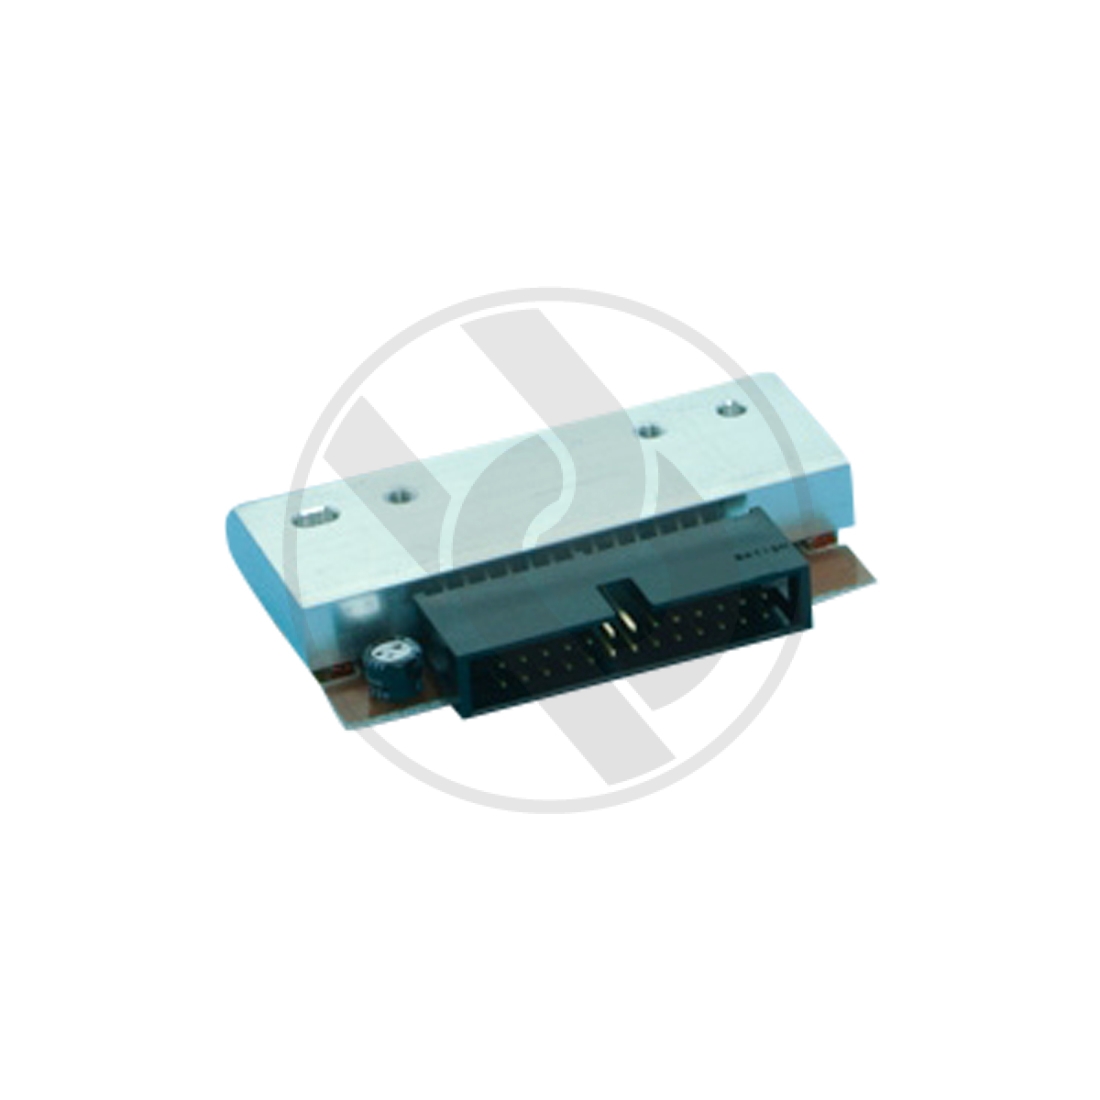 Thermal printhead, 37040535, for Valentin 37040535